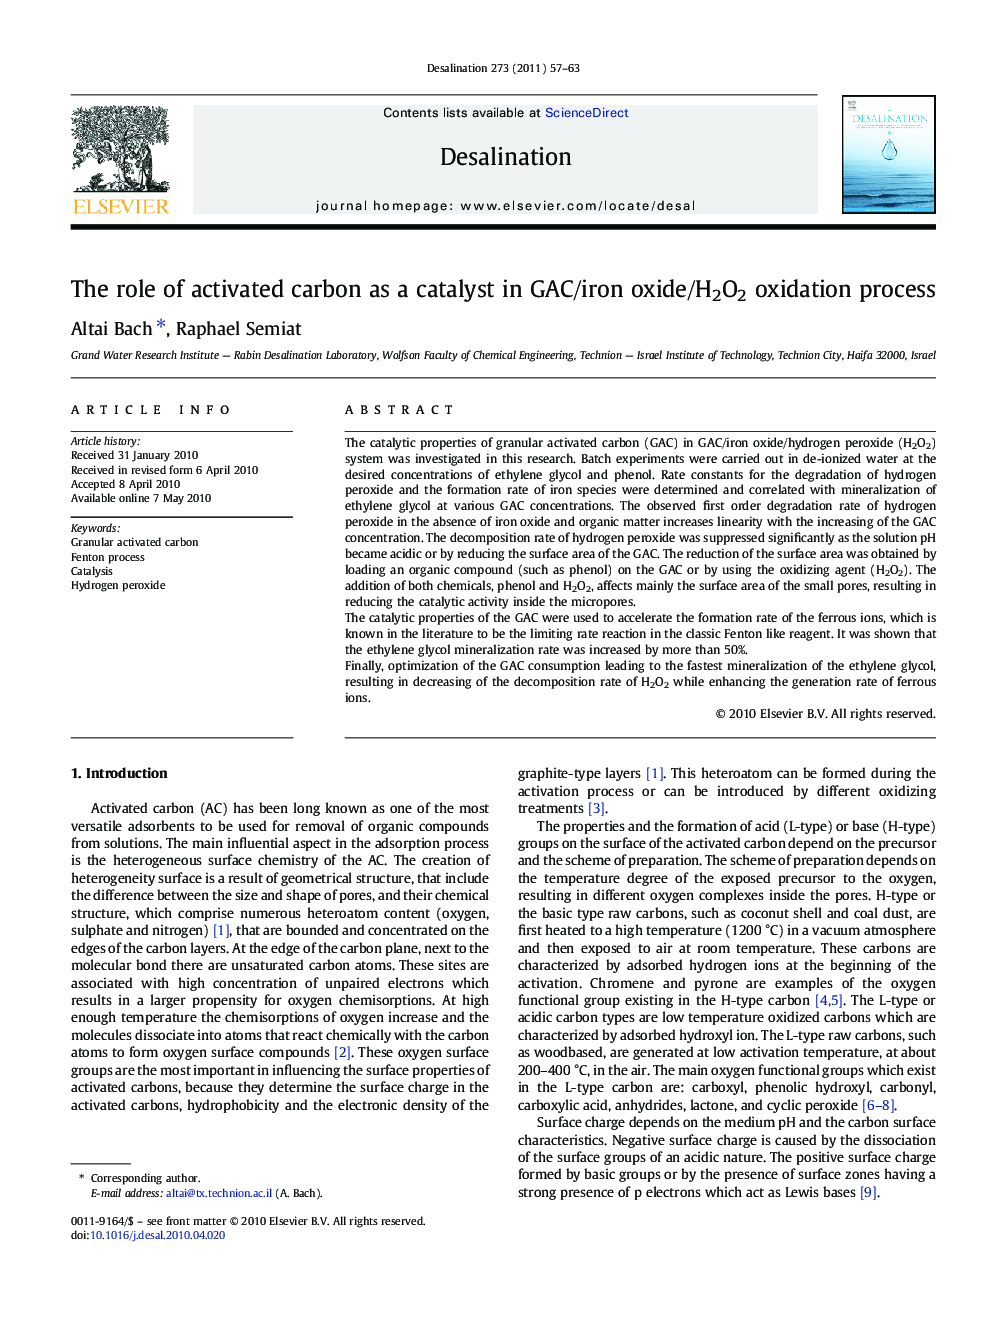 The role of activated carbon as a catalyst in GAC/iron oxide/H2O2 oxidation process